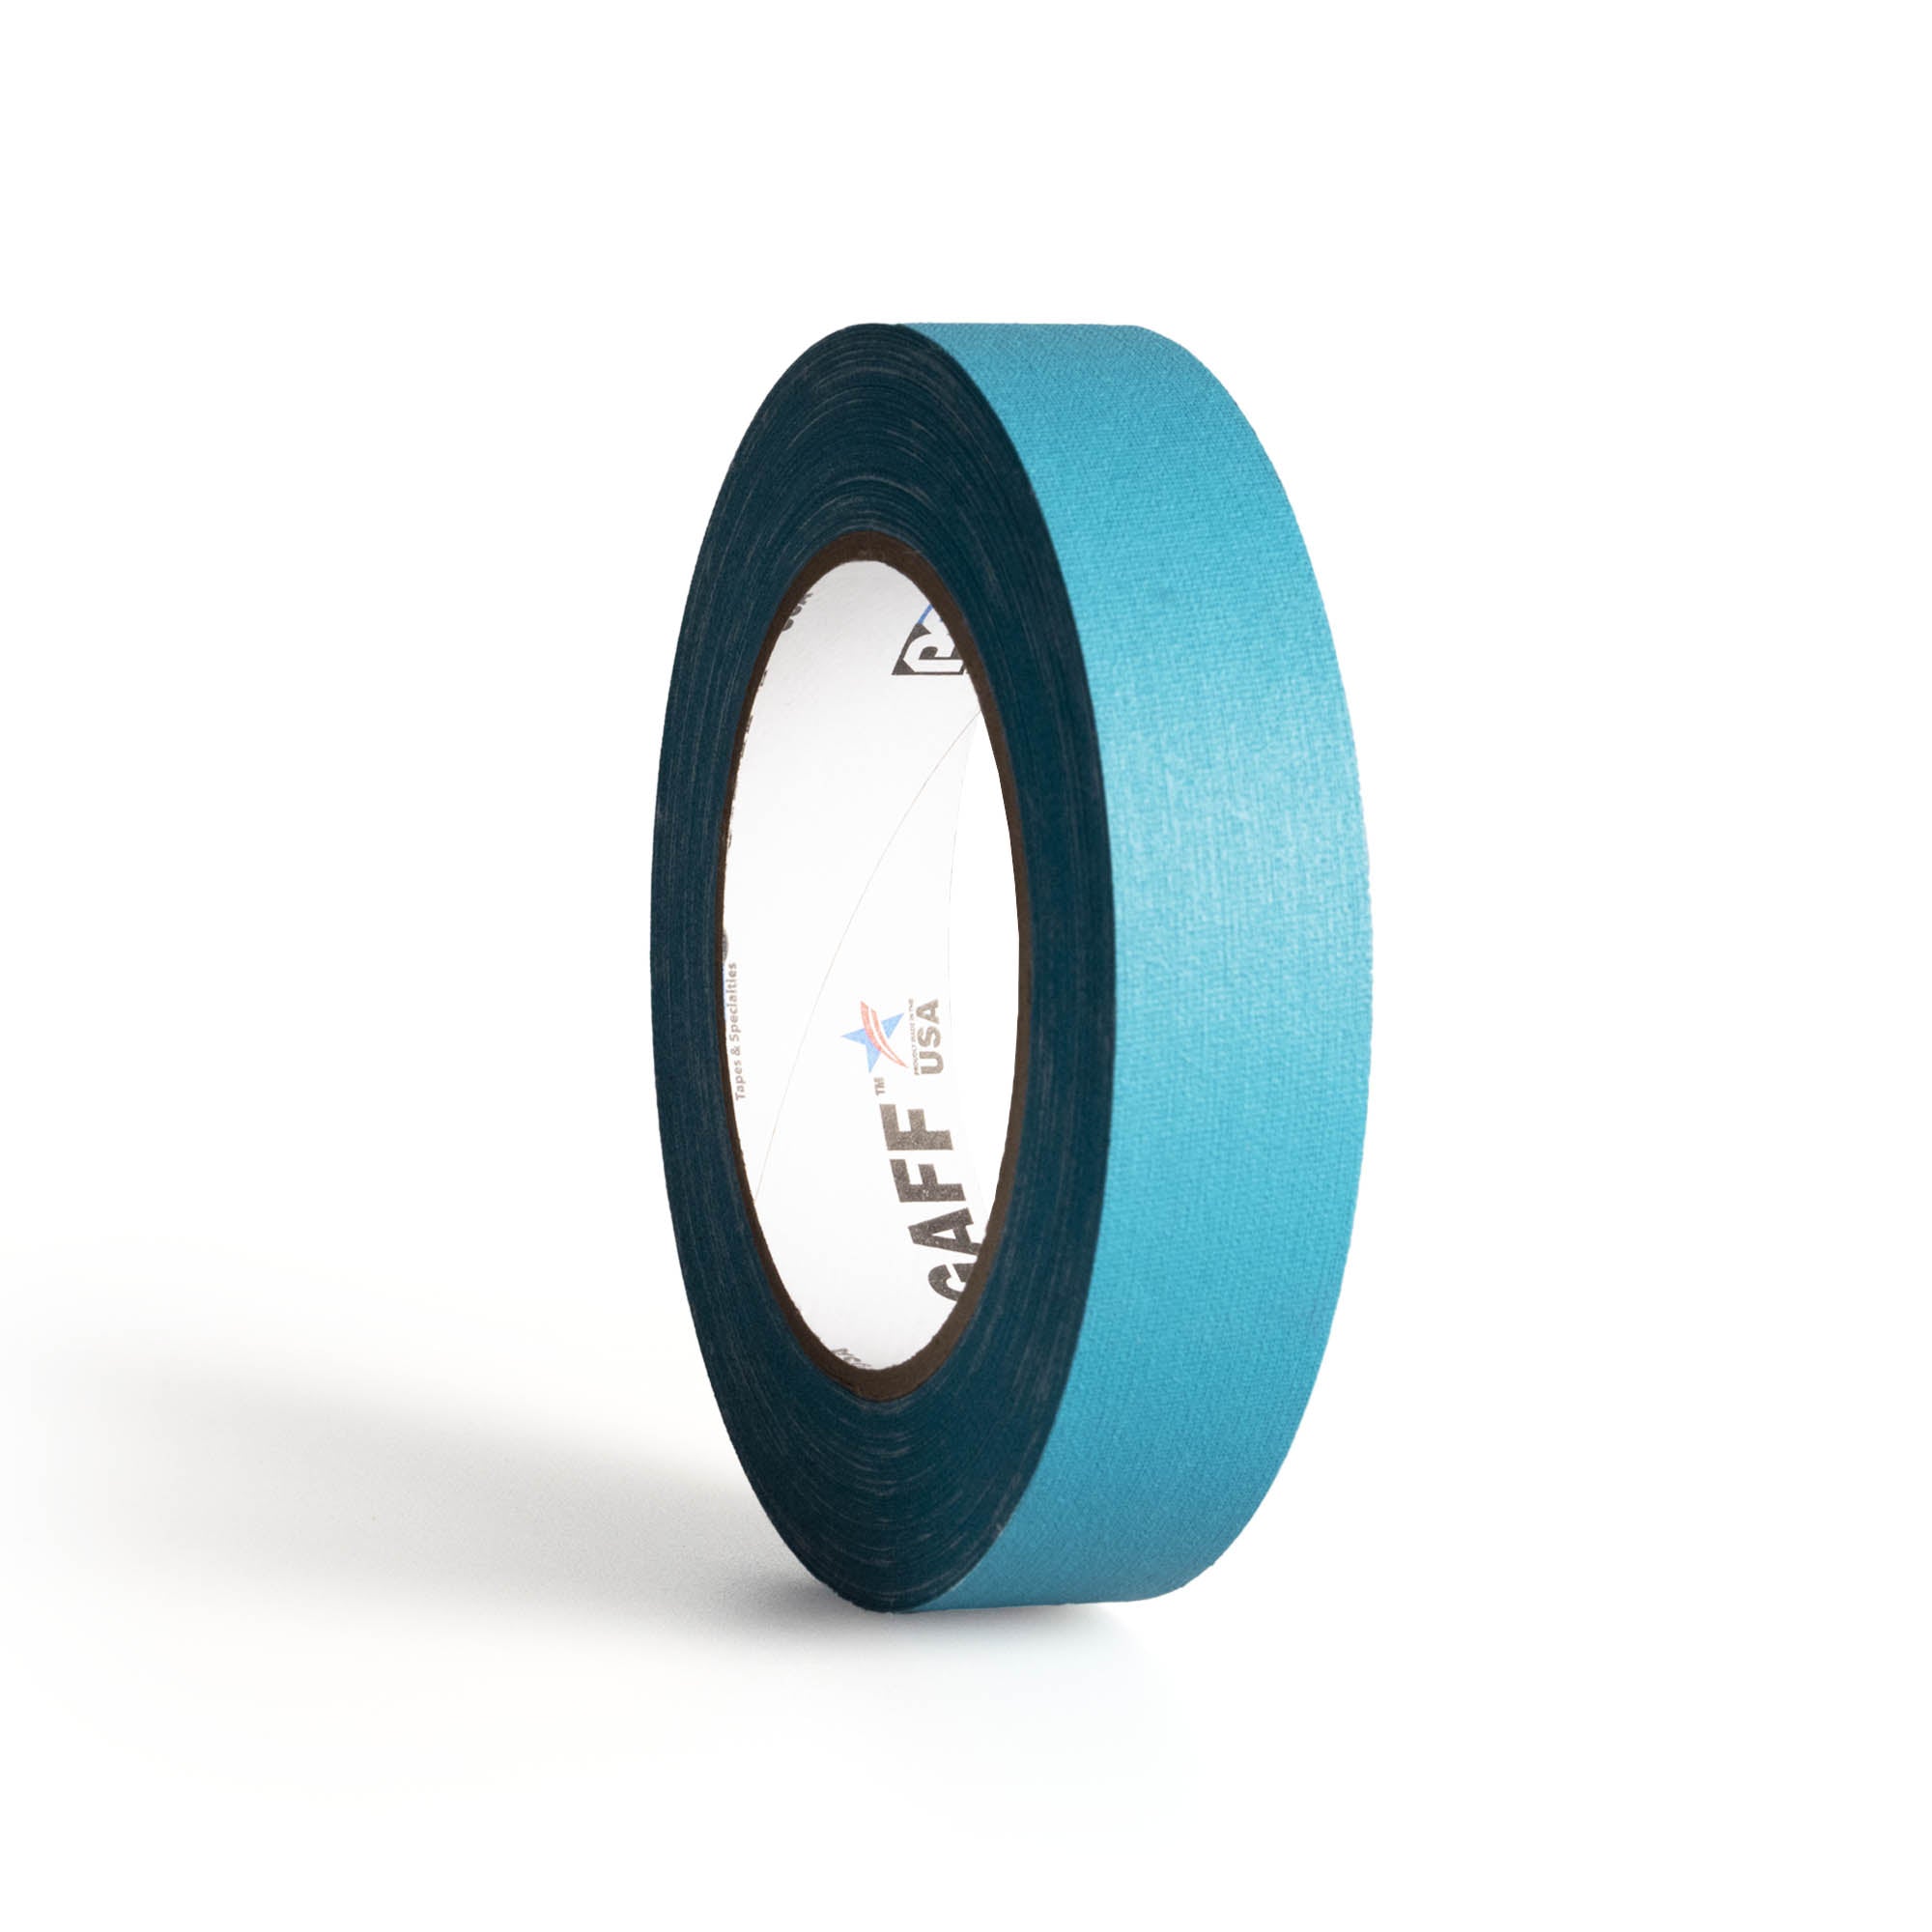 25m roll of pro gaff fabric adhesive tape in teal standing up